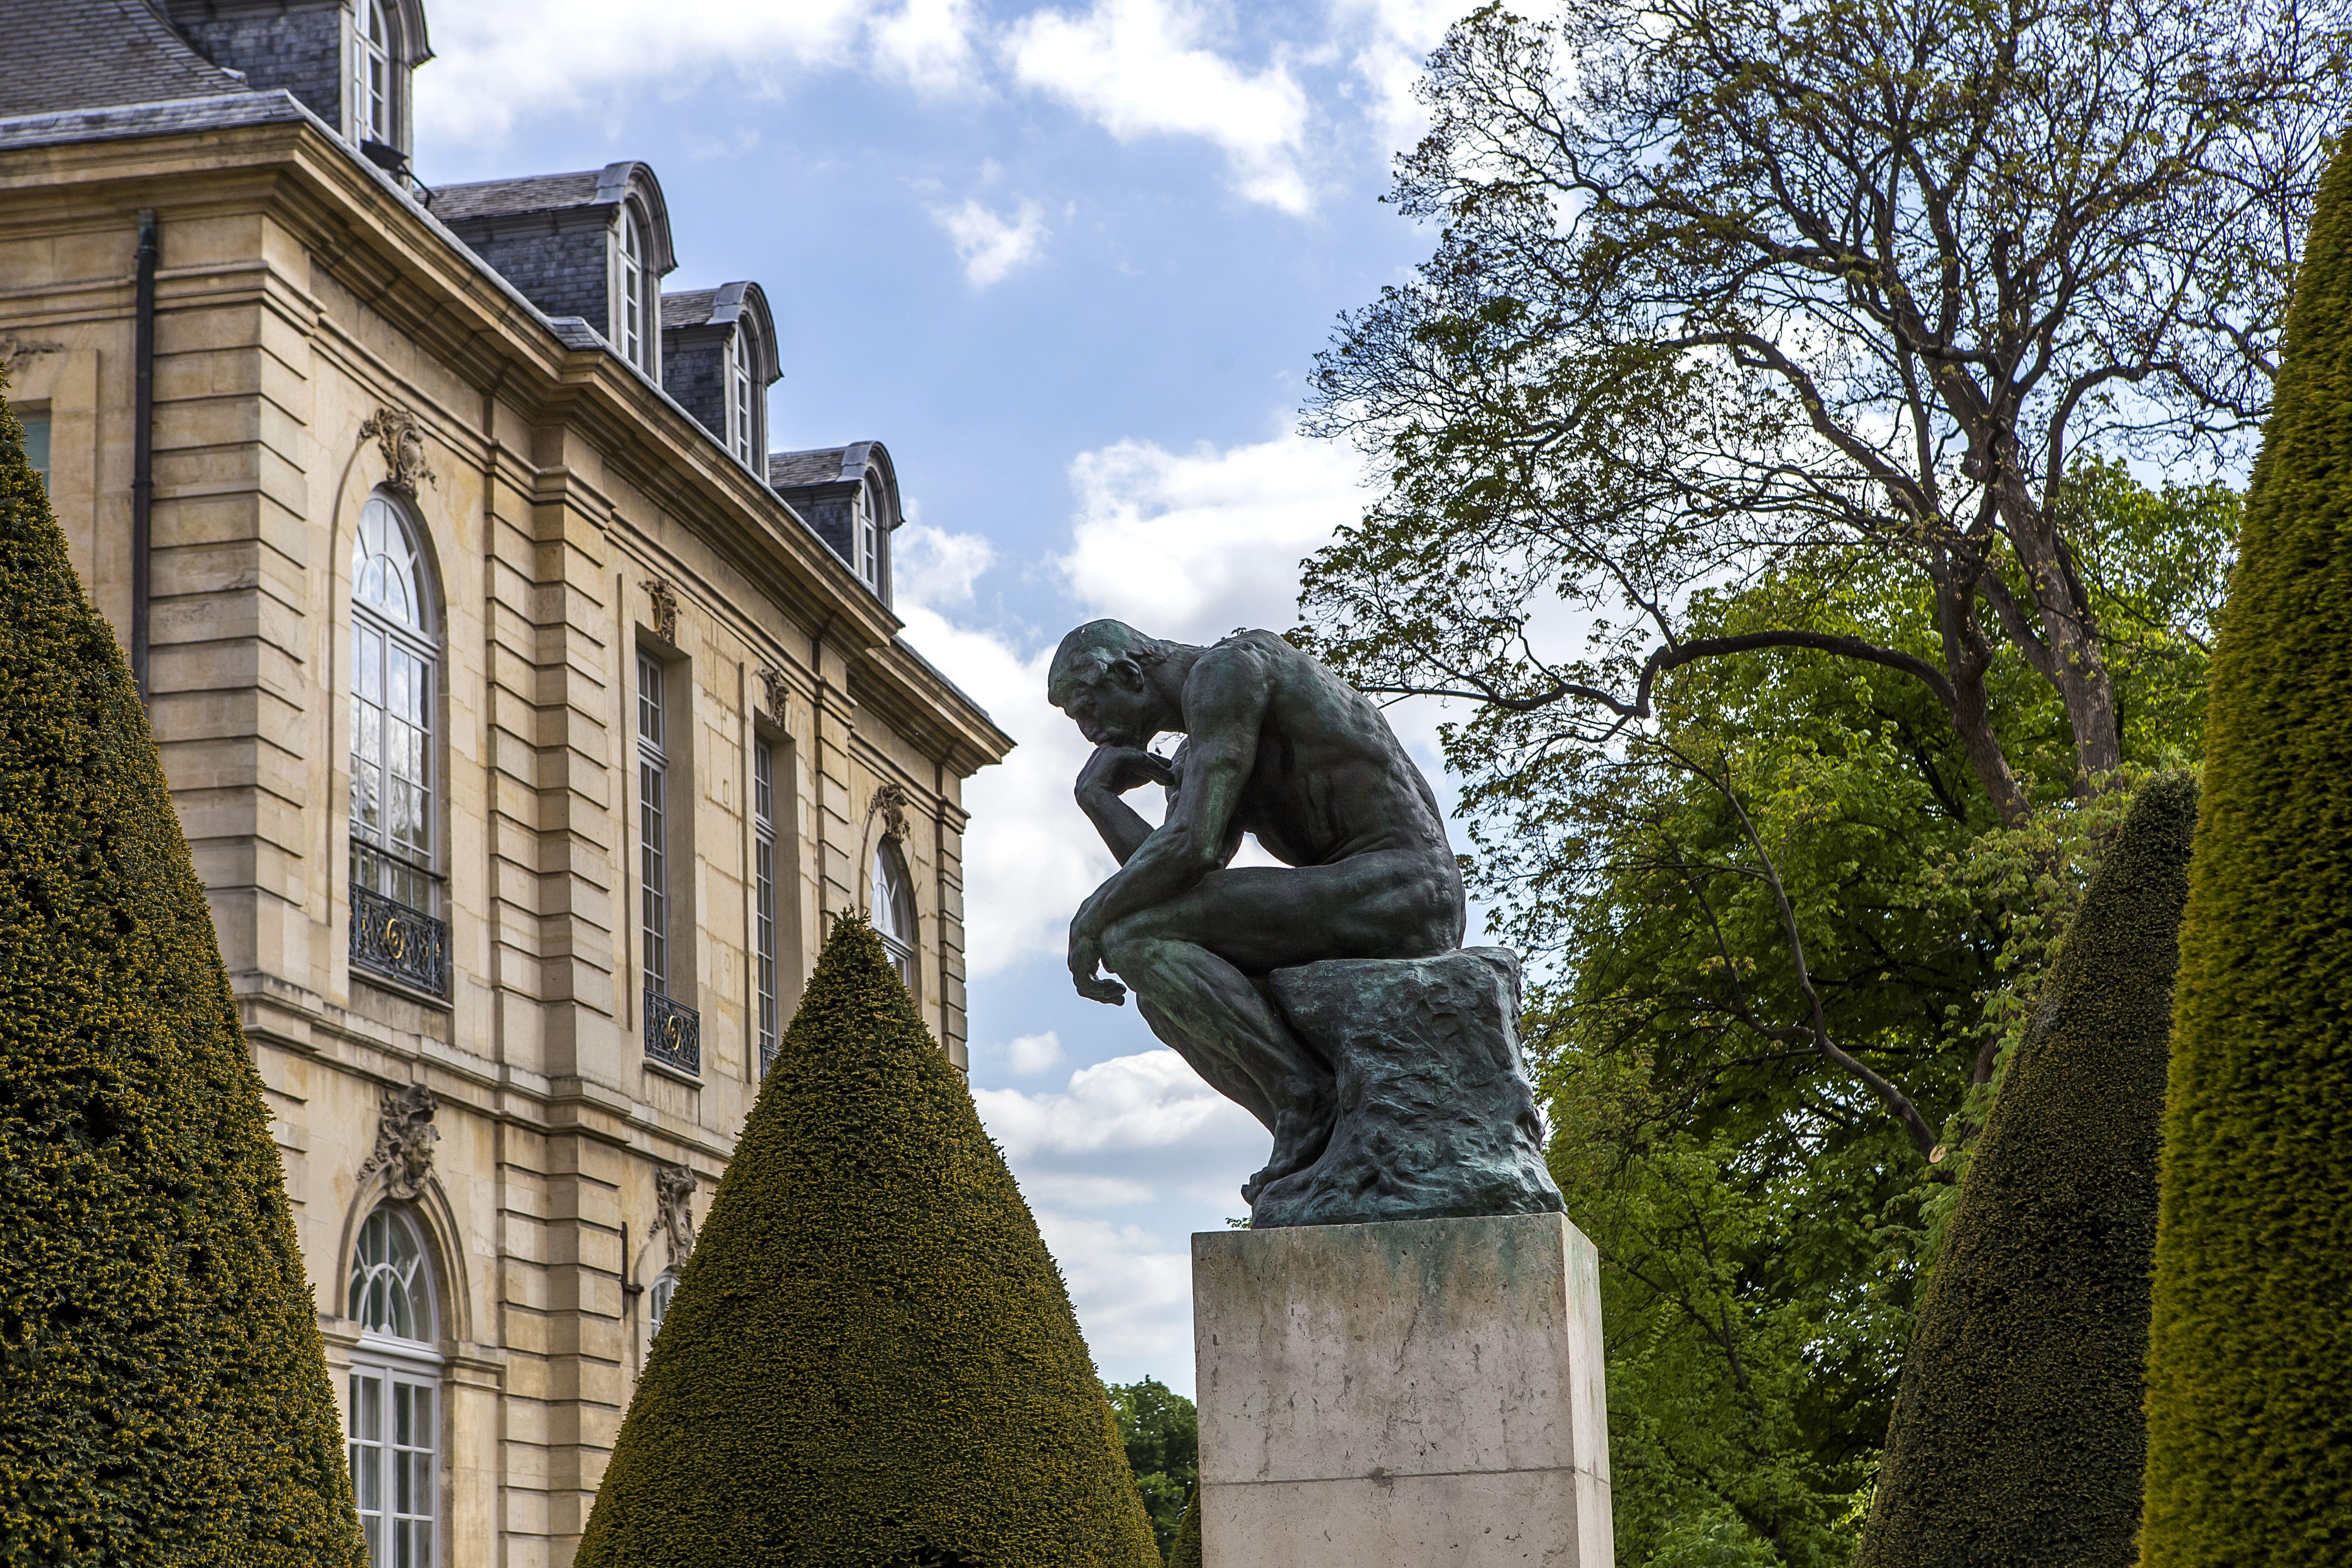 Statue of The Thinker in Rodin Museum